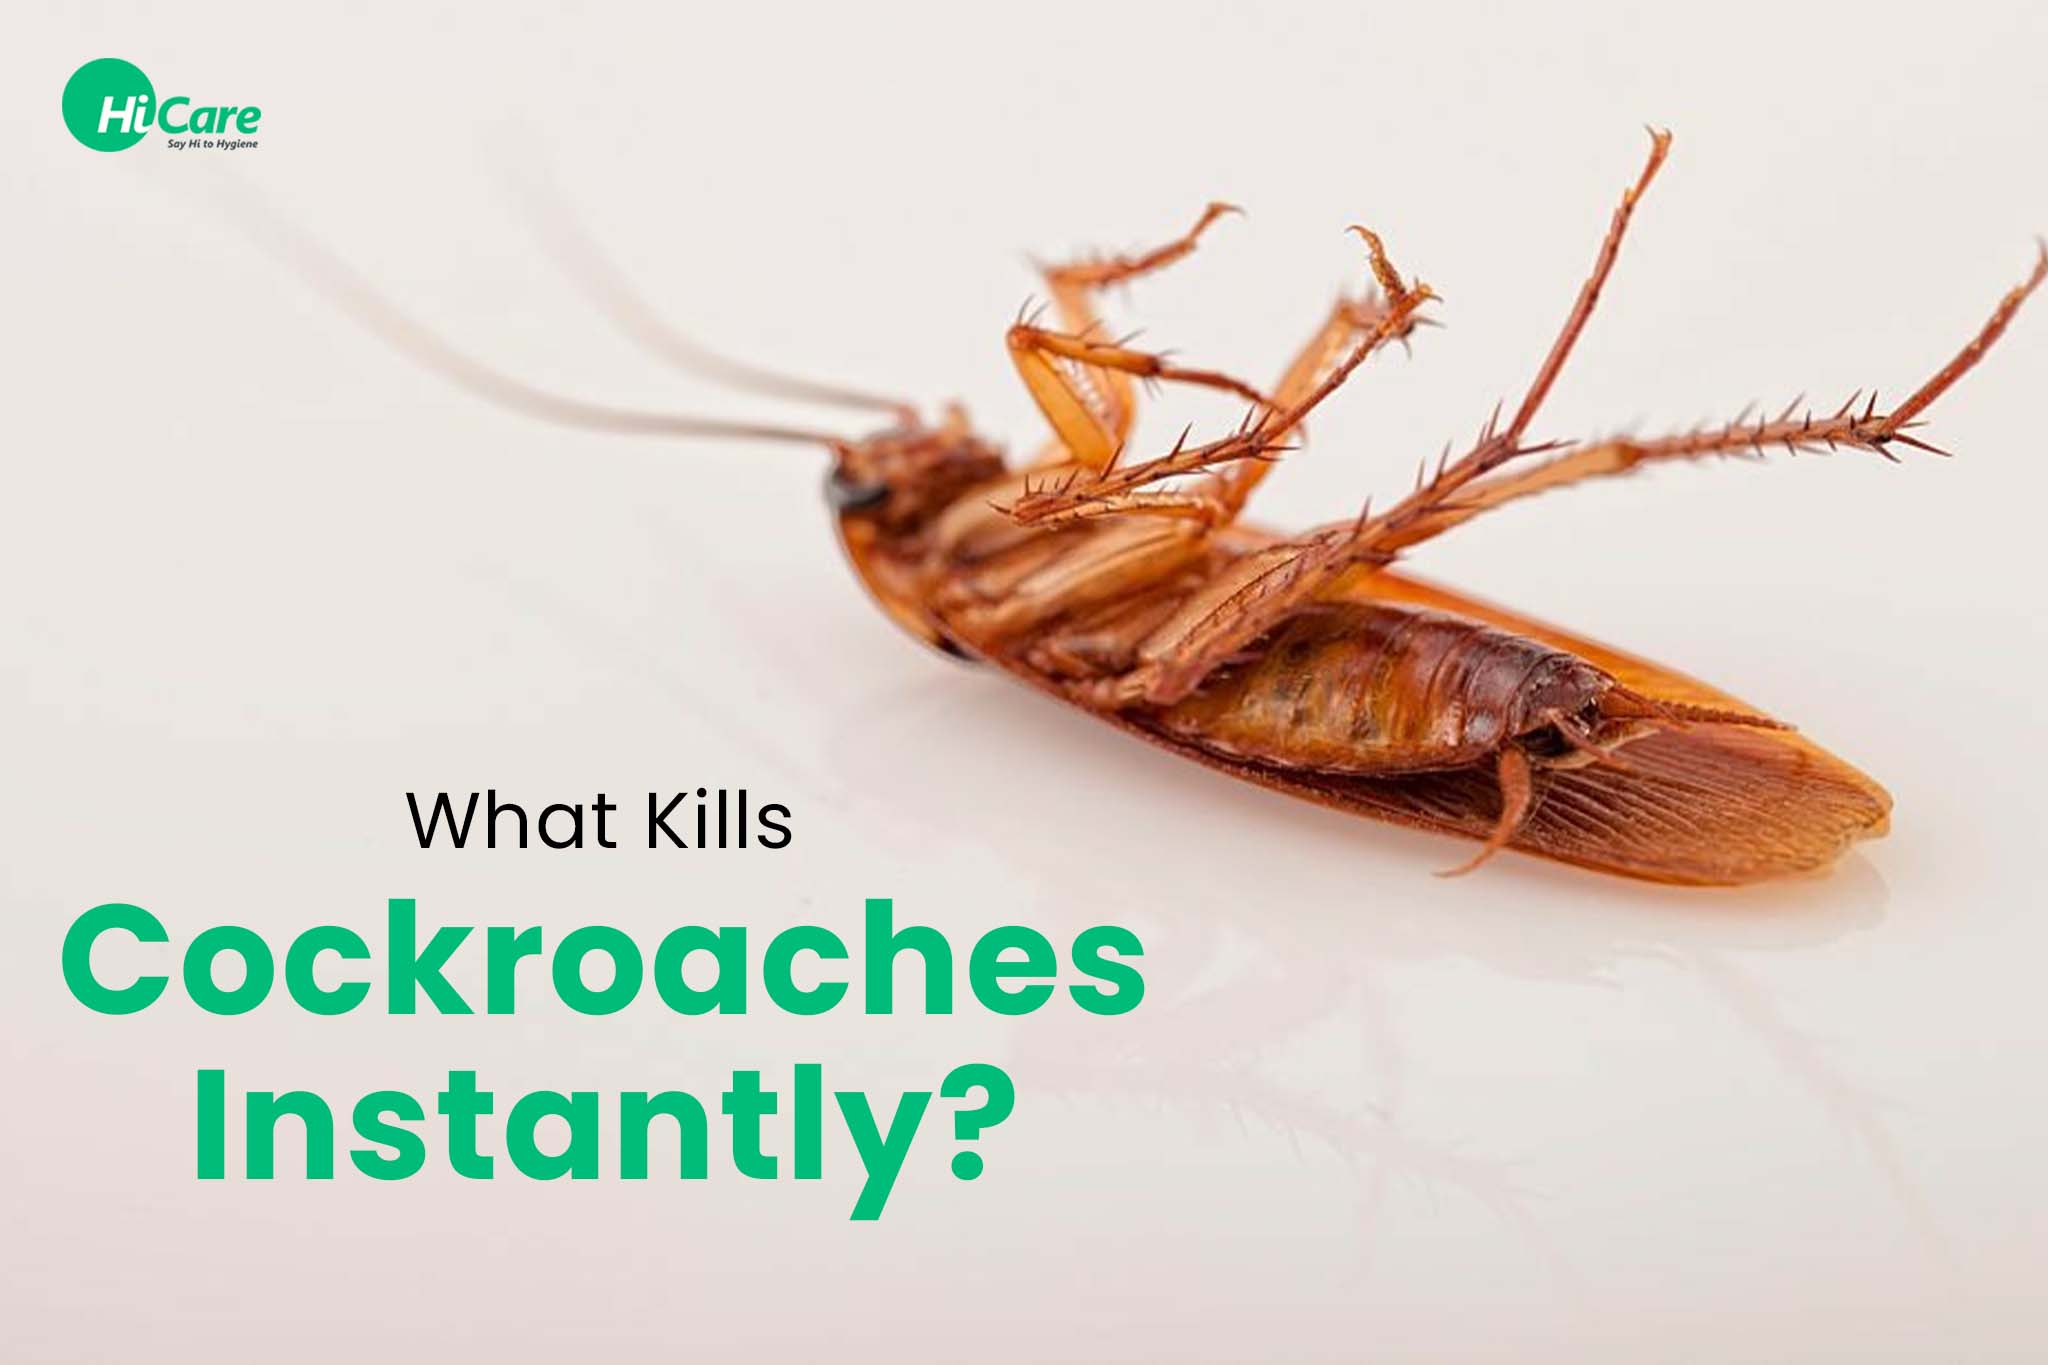 What Kills Cockroaches Instantly?